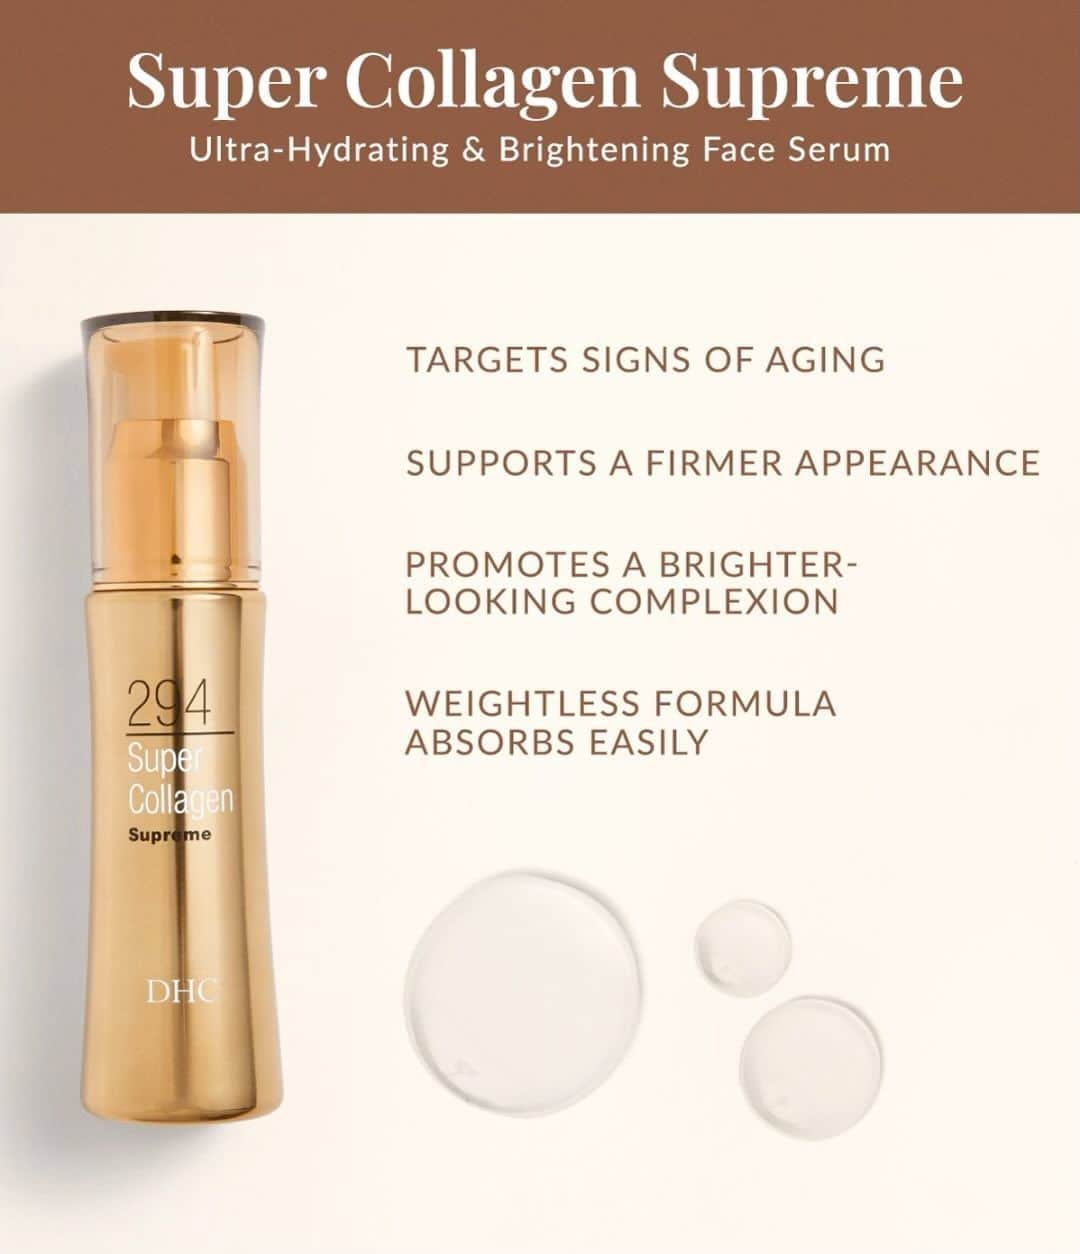 DHC Skincareのインスタグラム：「Have you tried our Super Collagen Supreme? 👀 An ultra-hydrating intensive serum that targets the visible signs of aging. It’s powered by DHC’s patented Dipeptide-8 - a micronized collagen that delivers exceptional results ✨  Ready to add this to your skincare collection?」